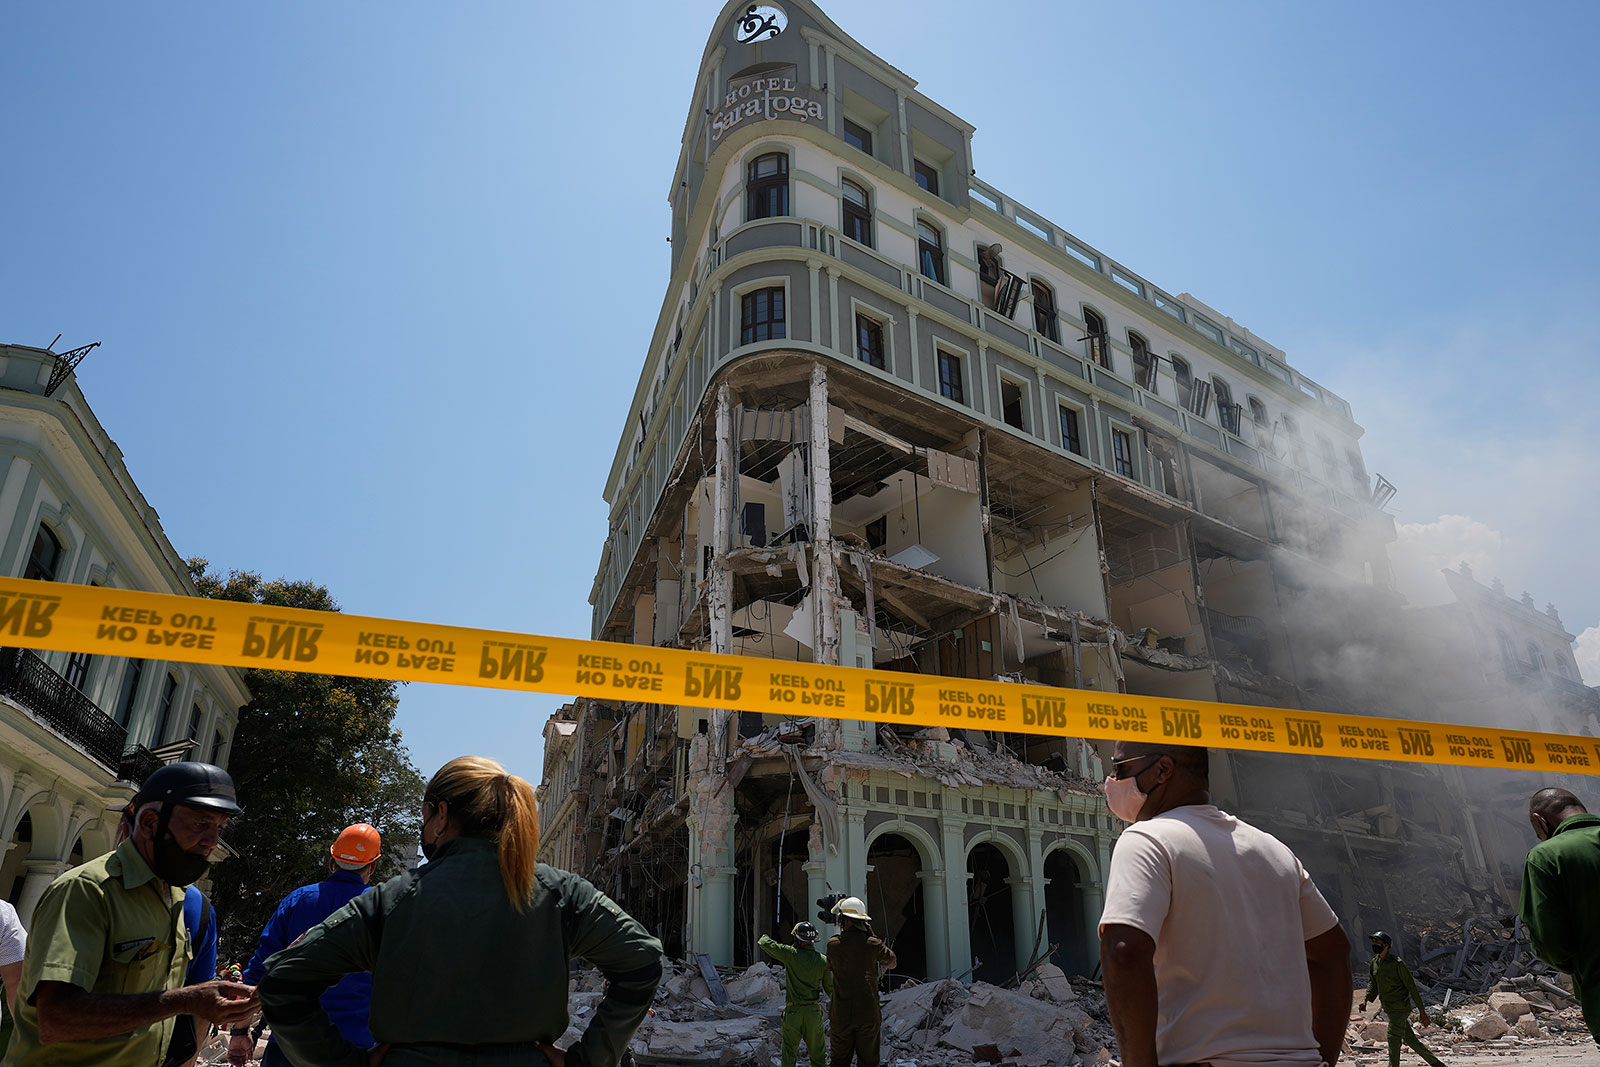 Hotel Saratoga is heavily damaged after an explosion in Havana on May 6.